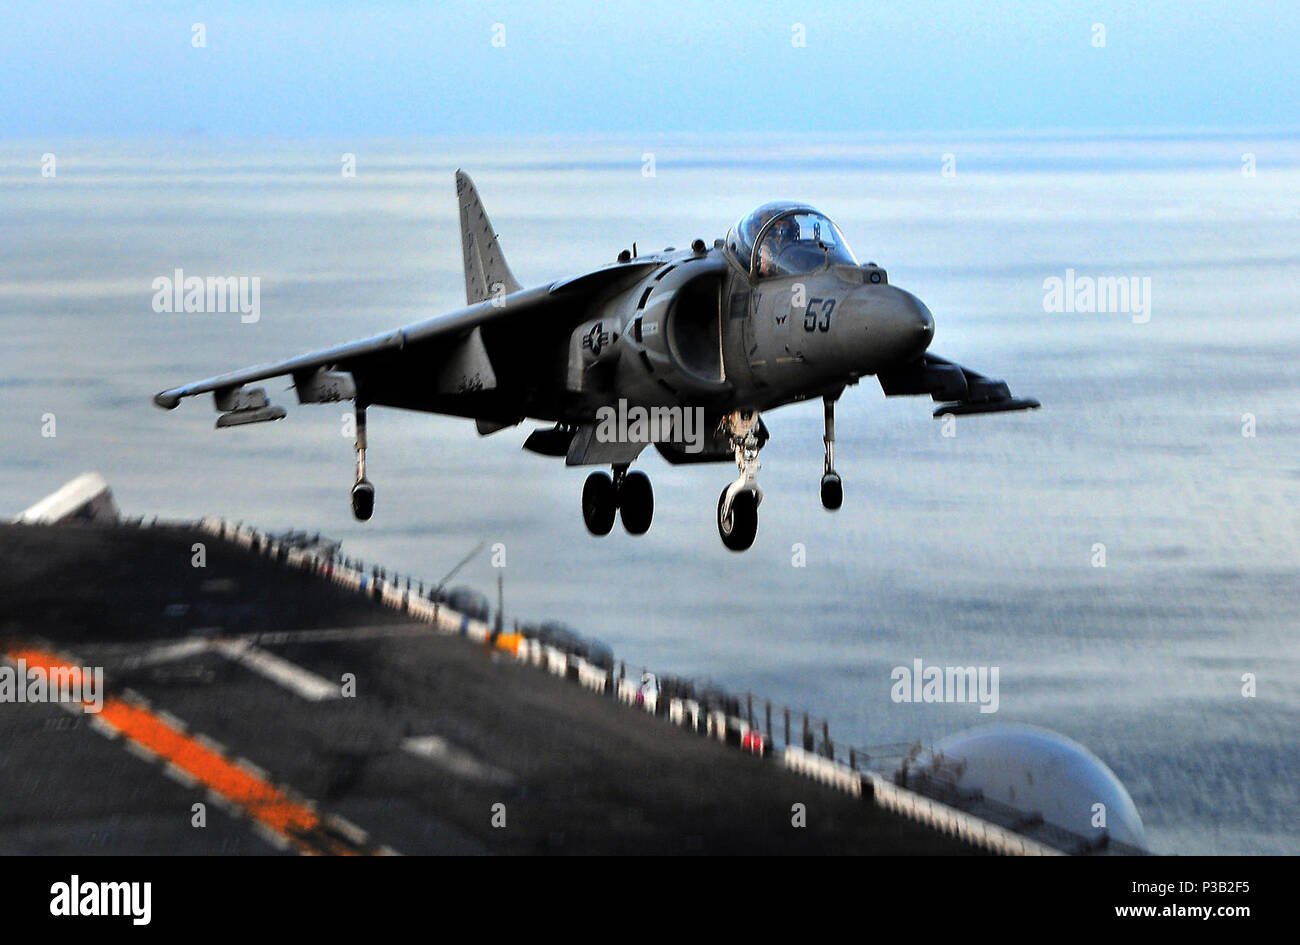 OCEAN (Dec. 5, 2008) An AV-8B Harrier II lands aboard the amphibious assault ship USS Boxer (LHD 4). Boxer is on a certification exercise supporting the 13th Marine Expeditionary Unit in preparation for an upcoming deployment. Stock Photo